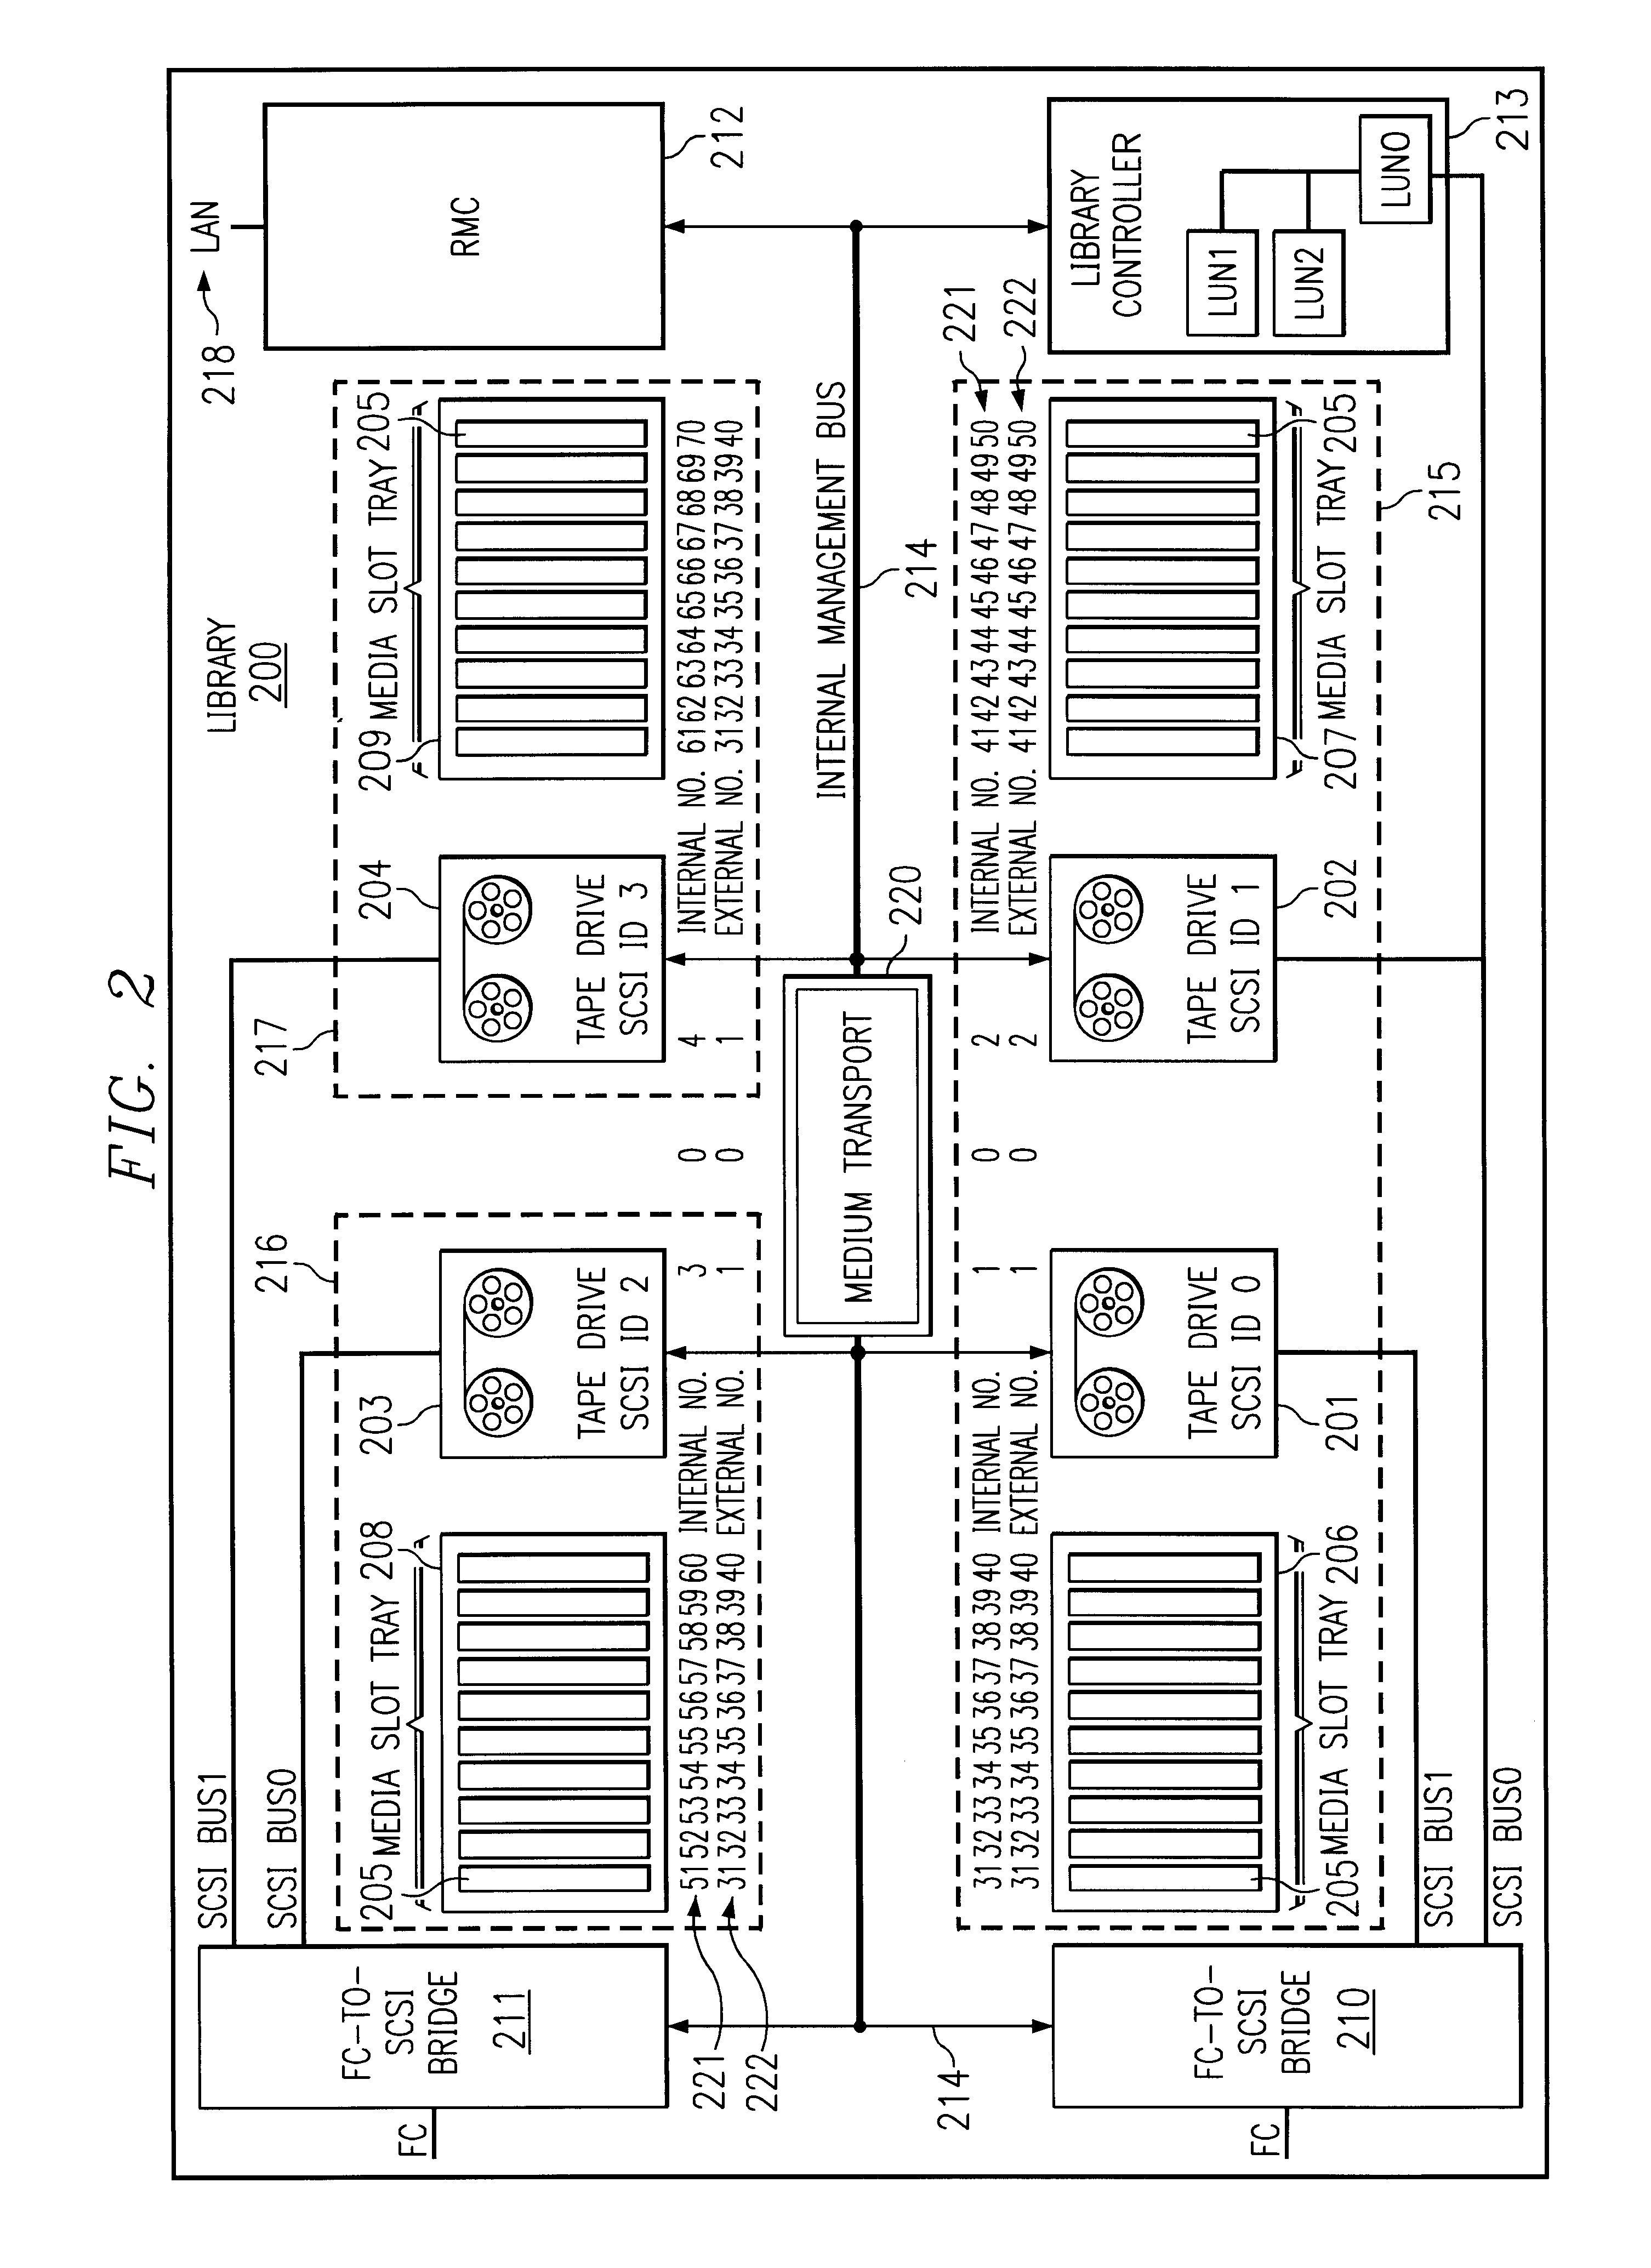 System and method for partitioning a storage area network associated data library employing element addresses